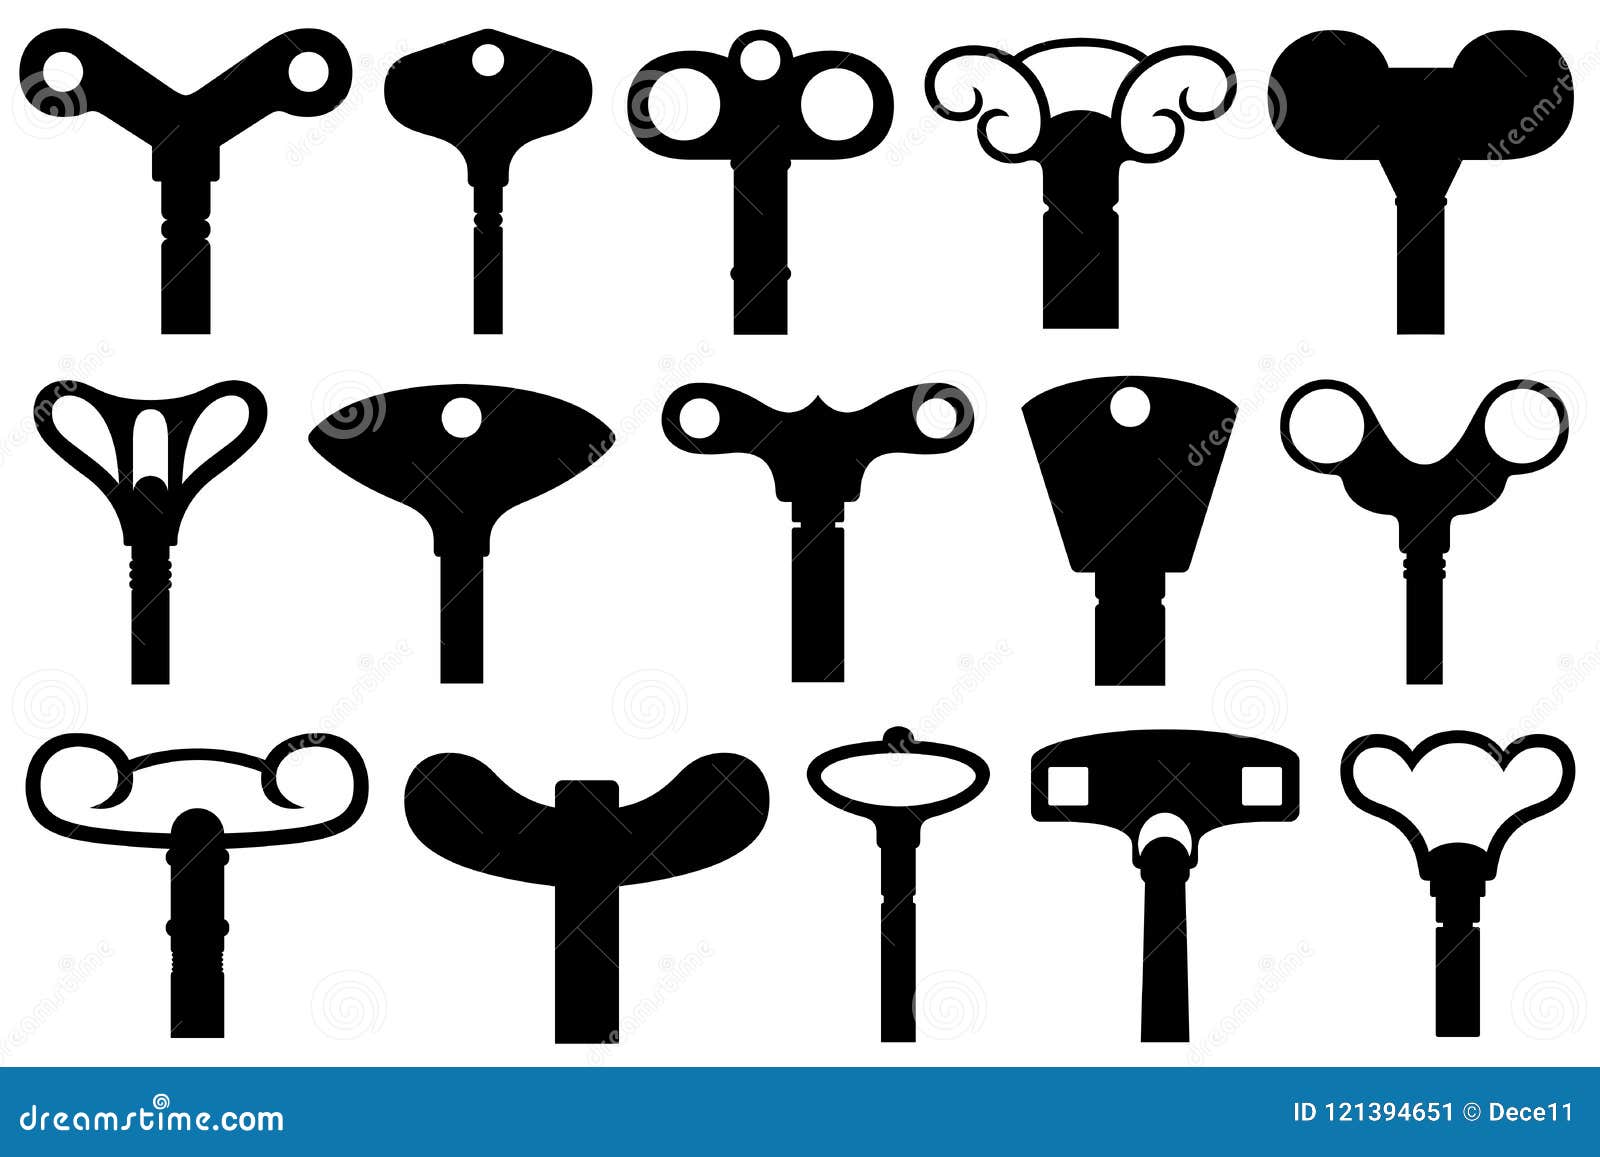 set-of-different-wind-up-keys-stock-vector-illustration-of-silhouette-connection-121394651